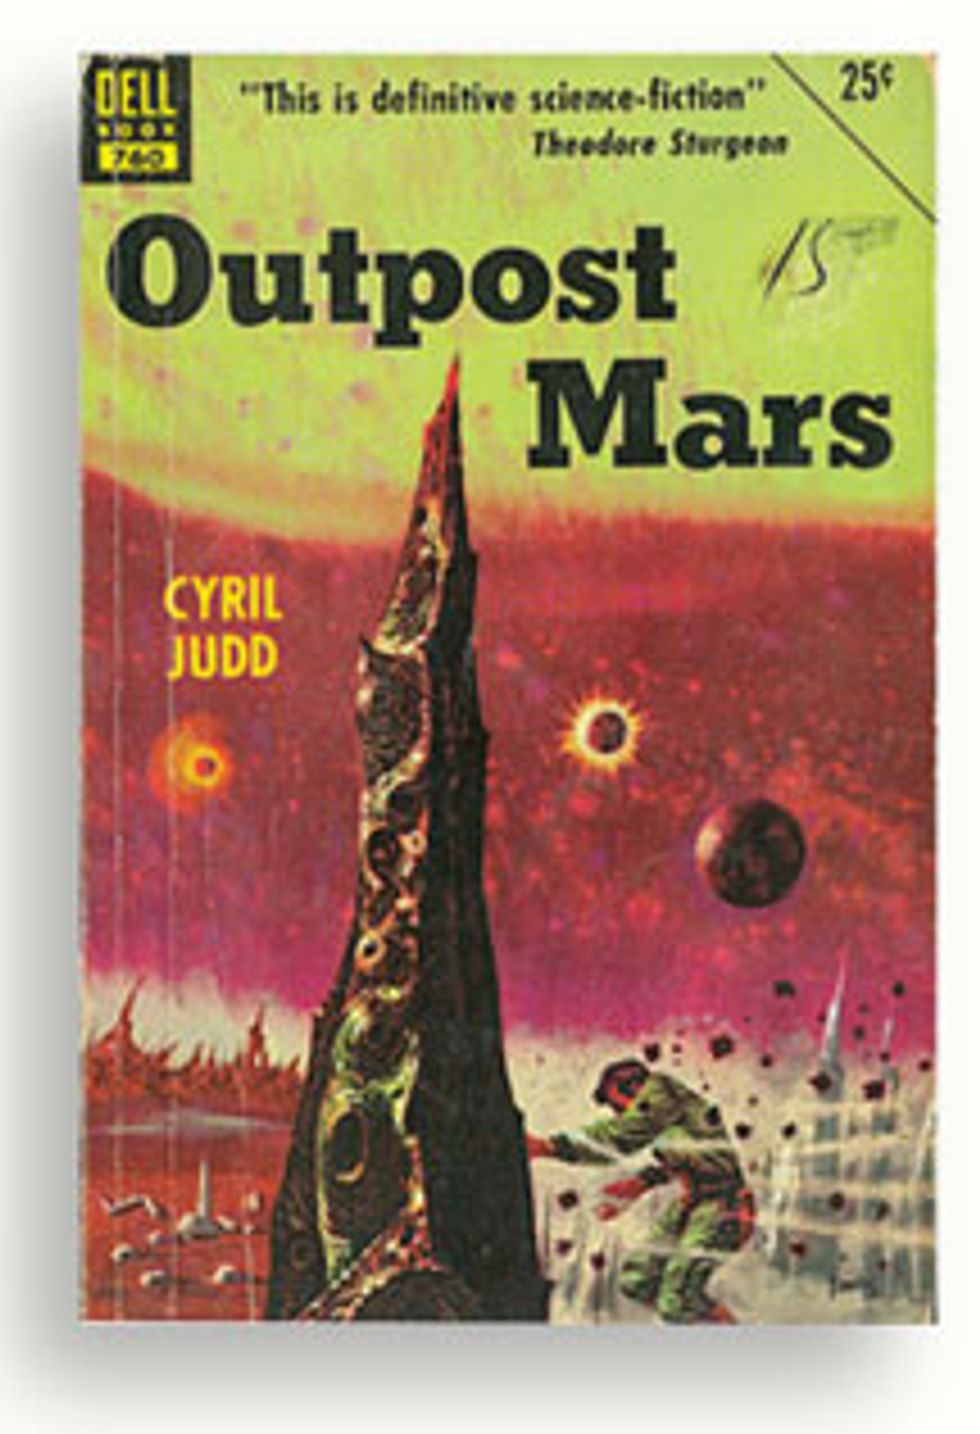 Outpost Mars book cover